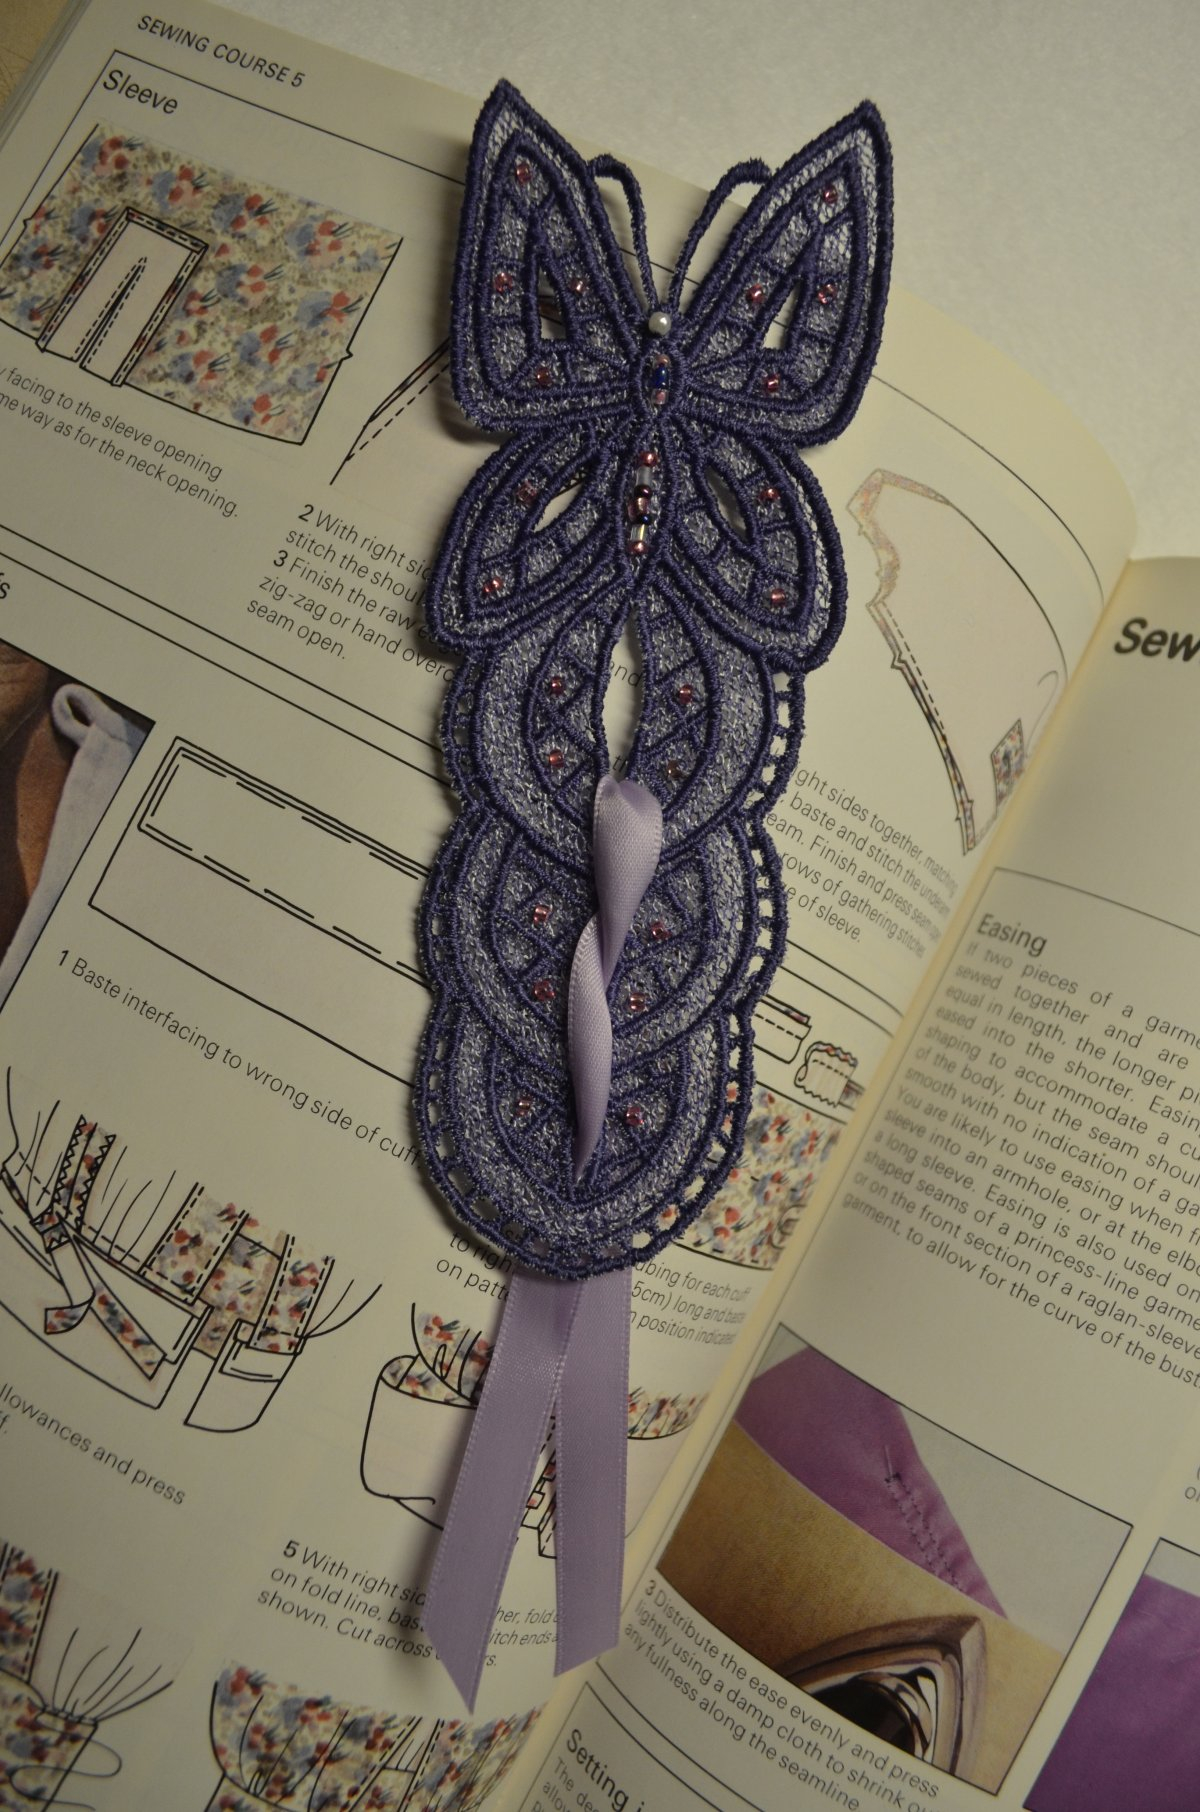 Free Standing Lace Embroidery Patterns What Makes A Design Fsl Stitch And Craft